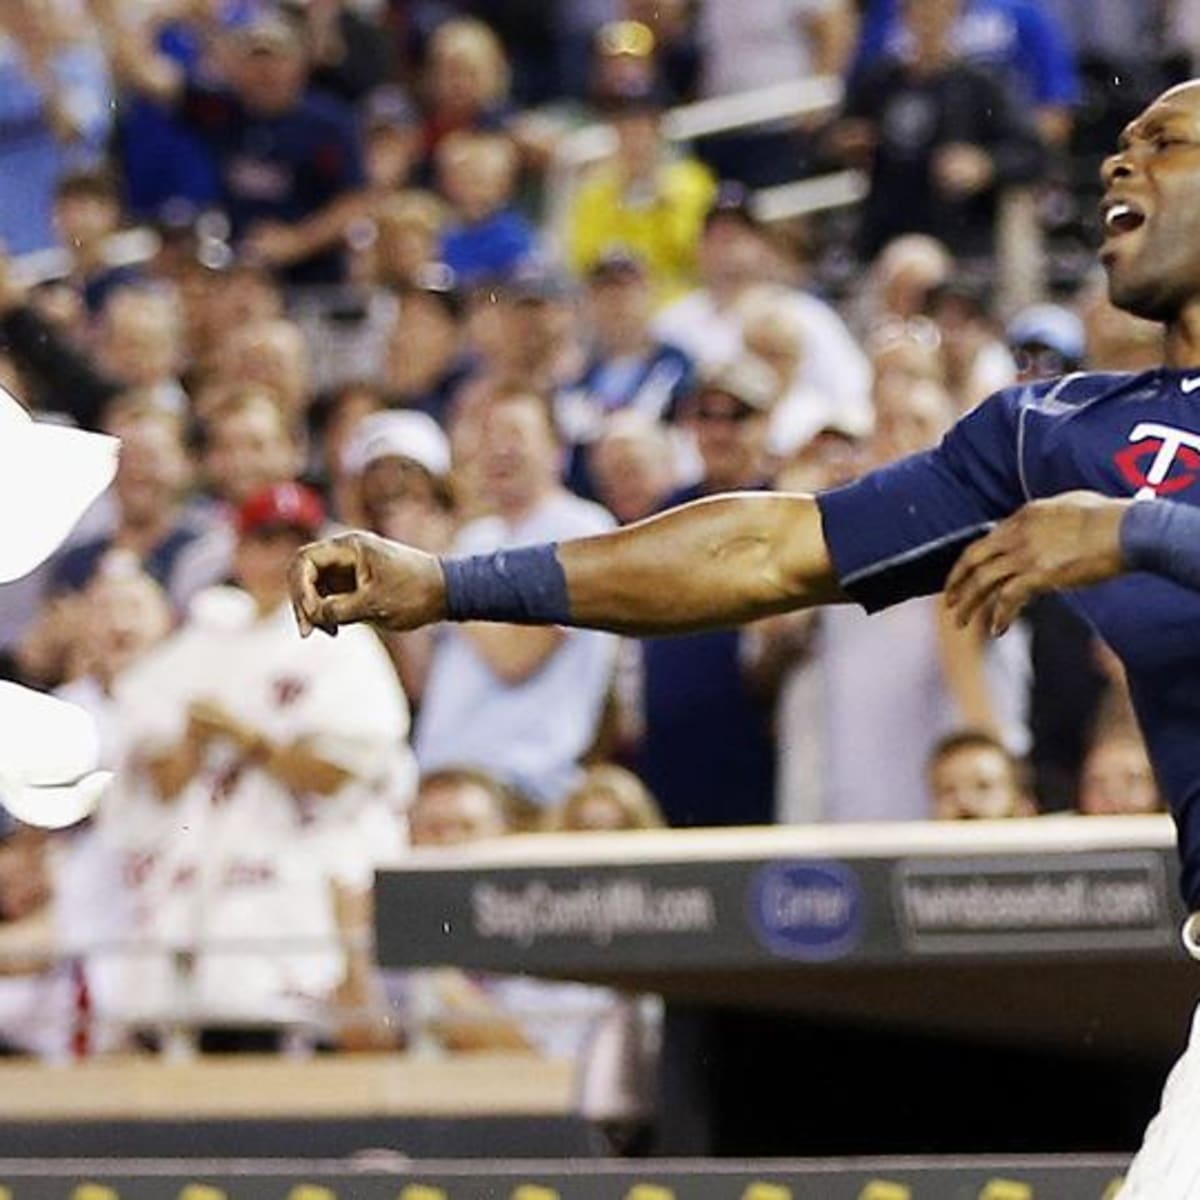 WATCH: Torii Hunter Goes Nuts, Starts Throwing Things After Getting Tossed  - CBS New York